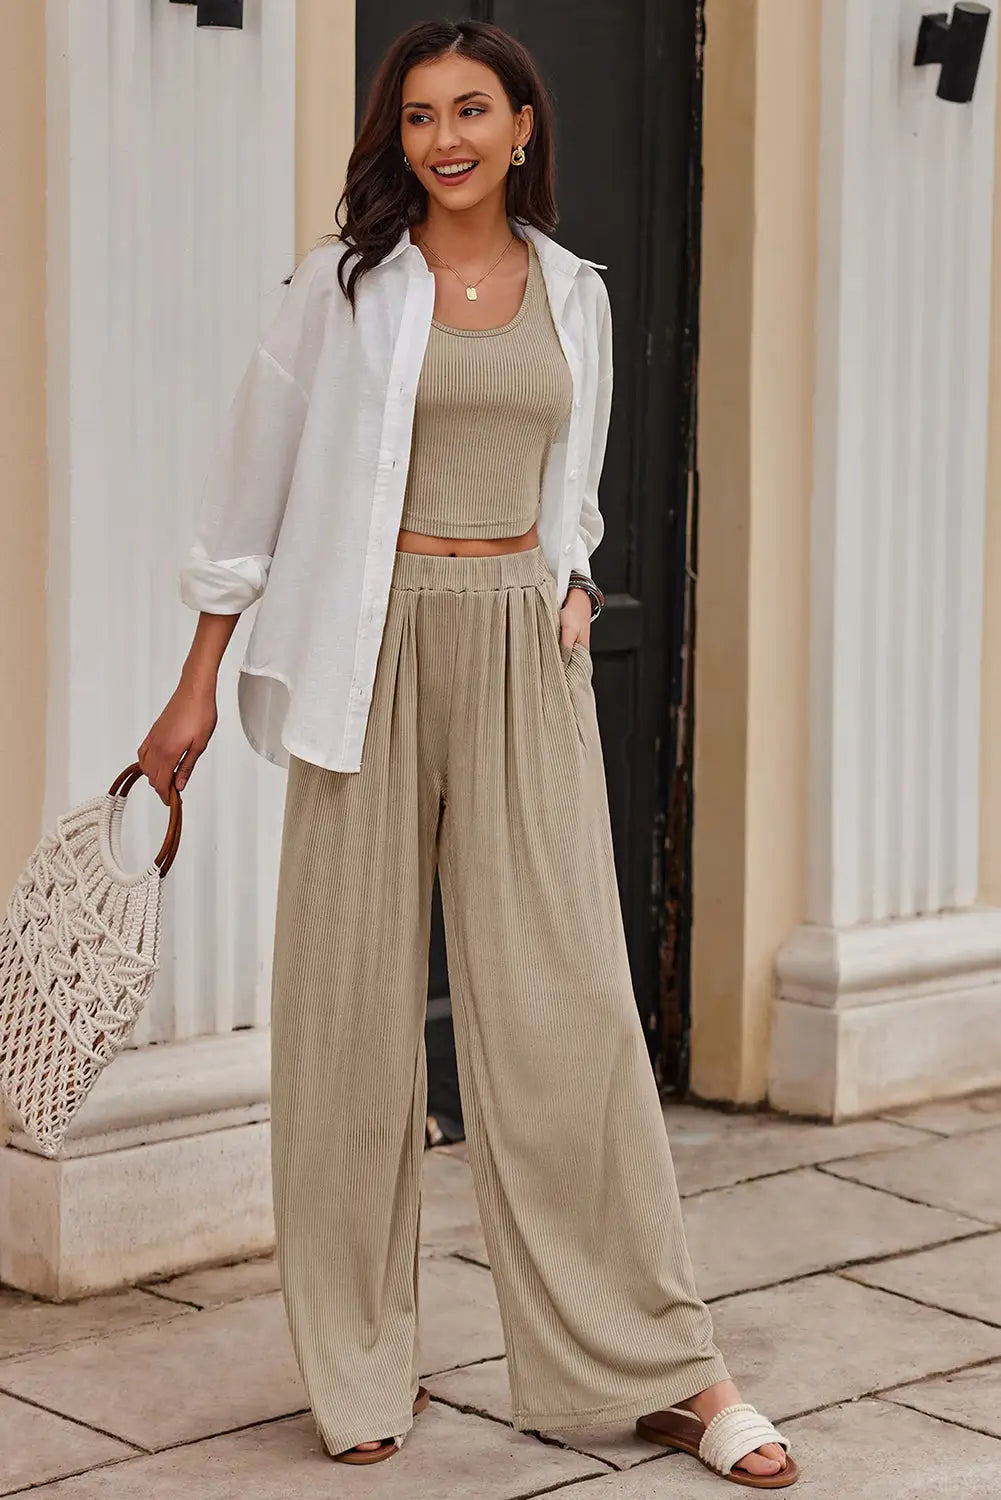 Textured crop top and wide leg pants outfit - two piece sets/pant sets